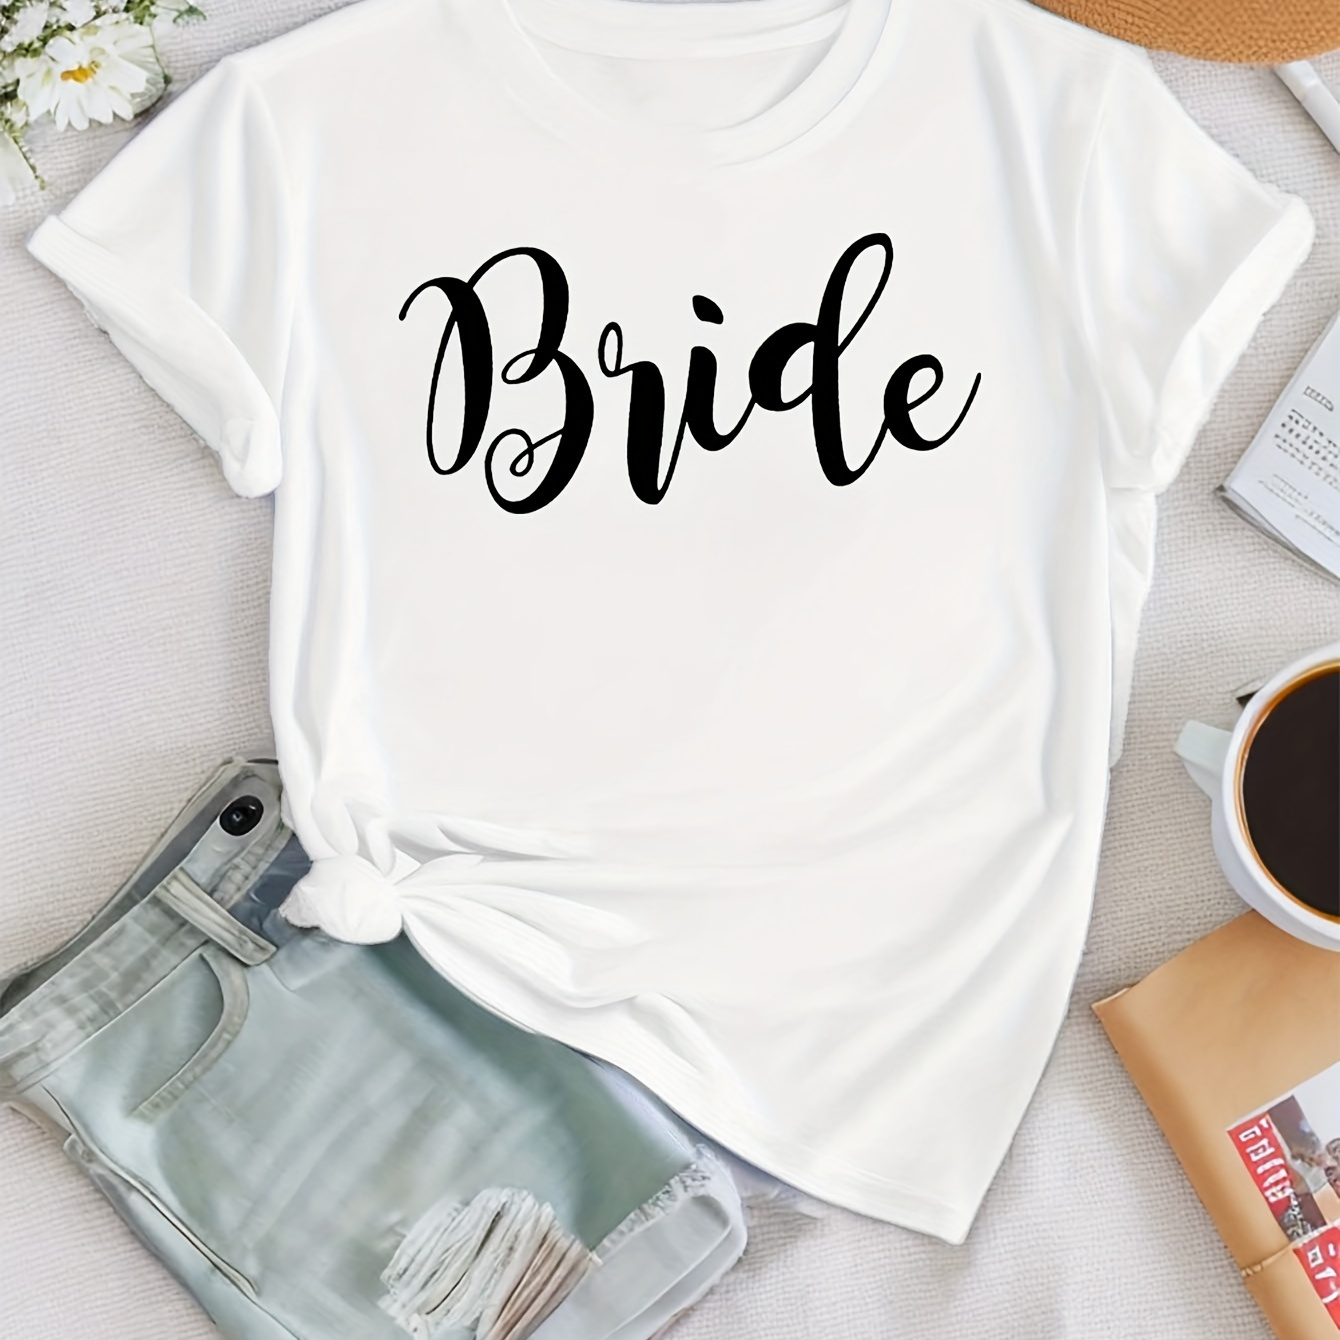 

Fashion Letters Bride Print T-shirt, Short Sleeve Crew Neck Casual Top For Summer & Spring, Women's Clothing